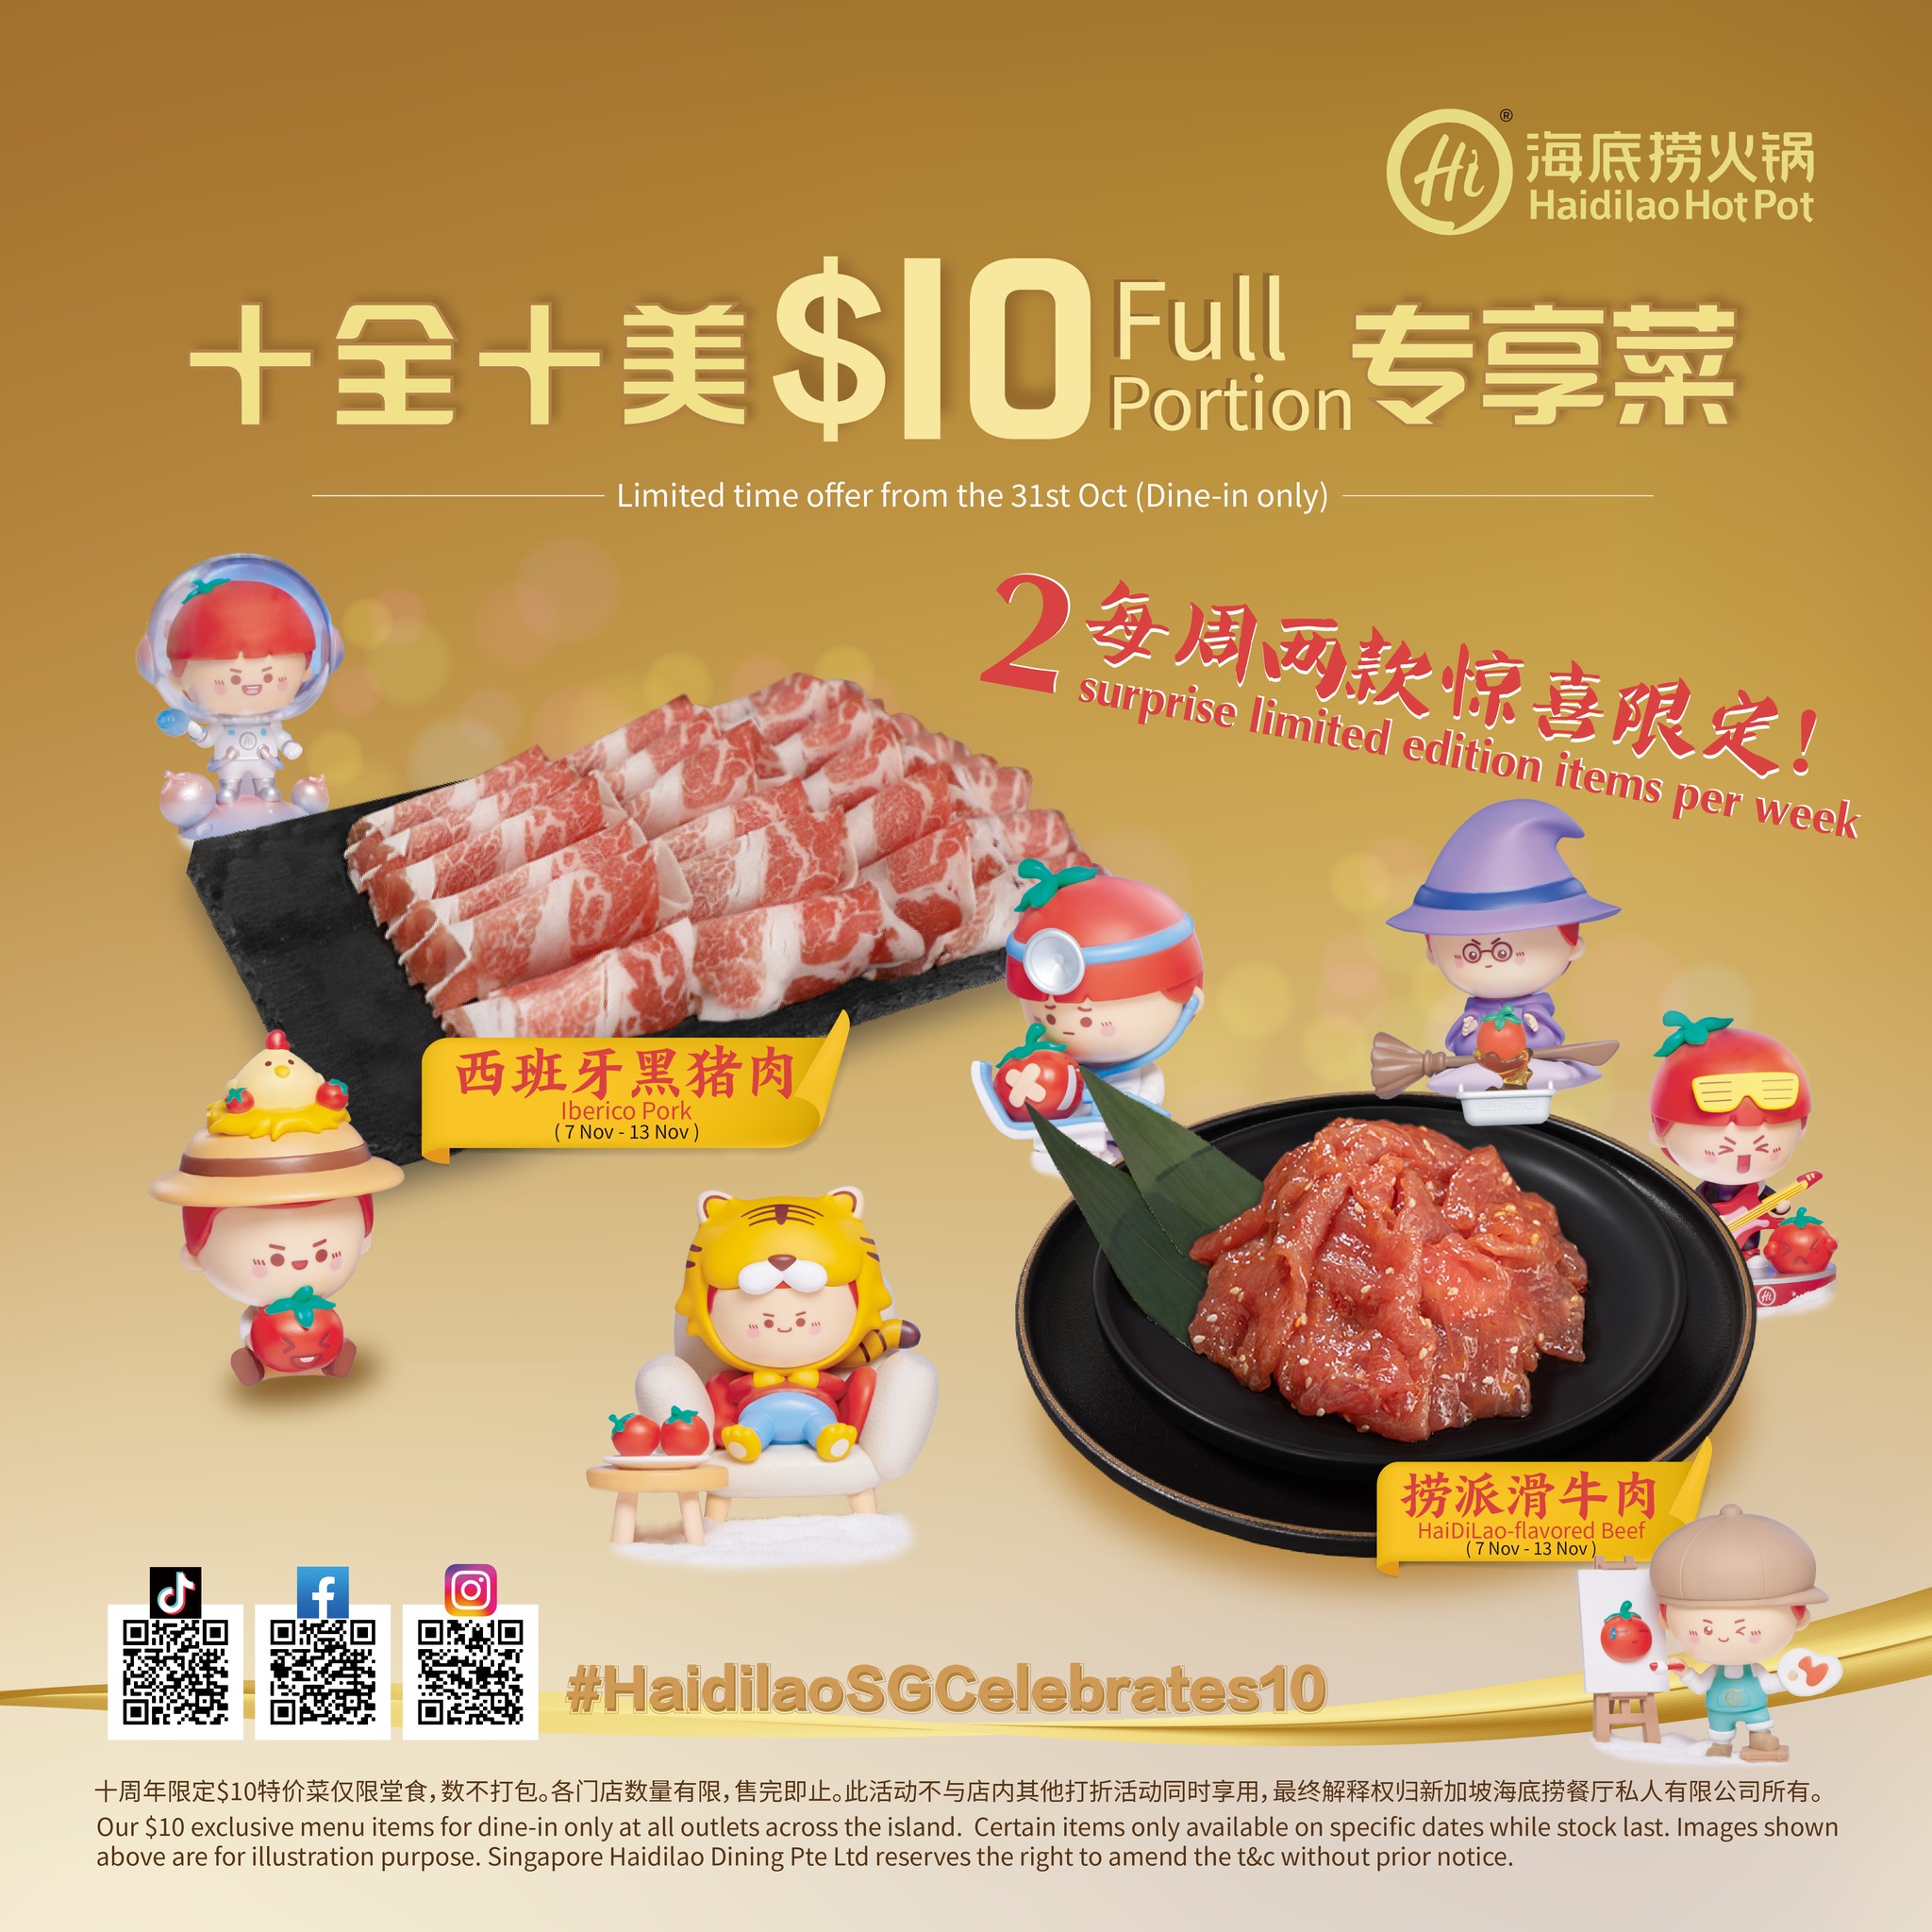 Lobang: Haidilao will be offering full portion meat and seafood dishes at $10 each (U.P. up to $28) to celebrate its 10th anniversary (31 Oct - 4 Dec 22) - 5